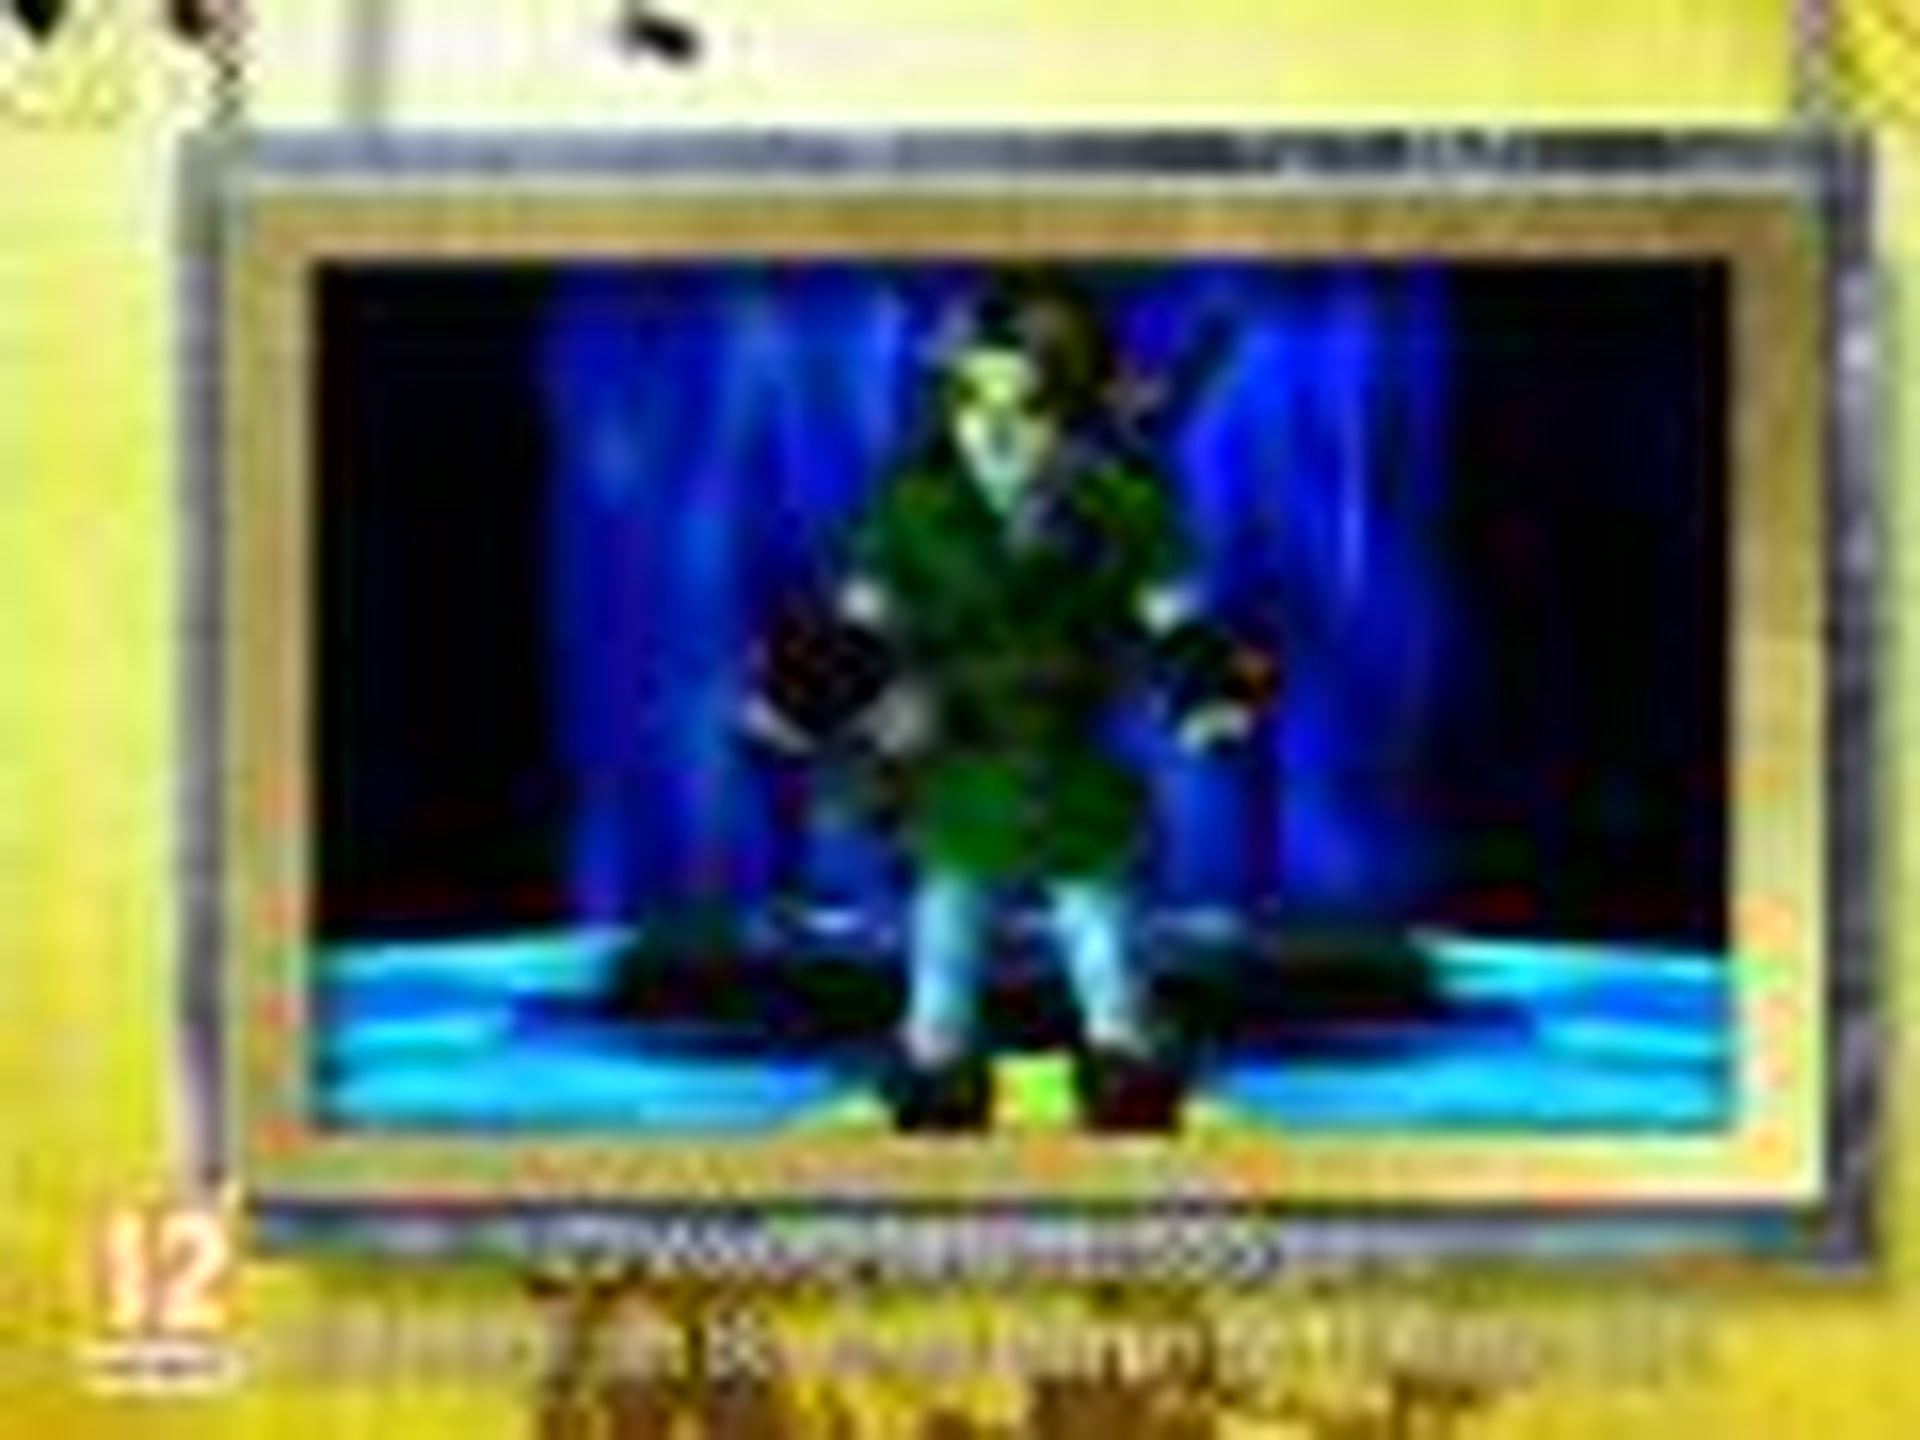 The Legend of Zelda: Ocarina of Time inducted into the World Video Game  Hall of Fame